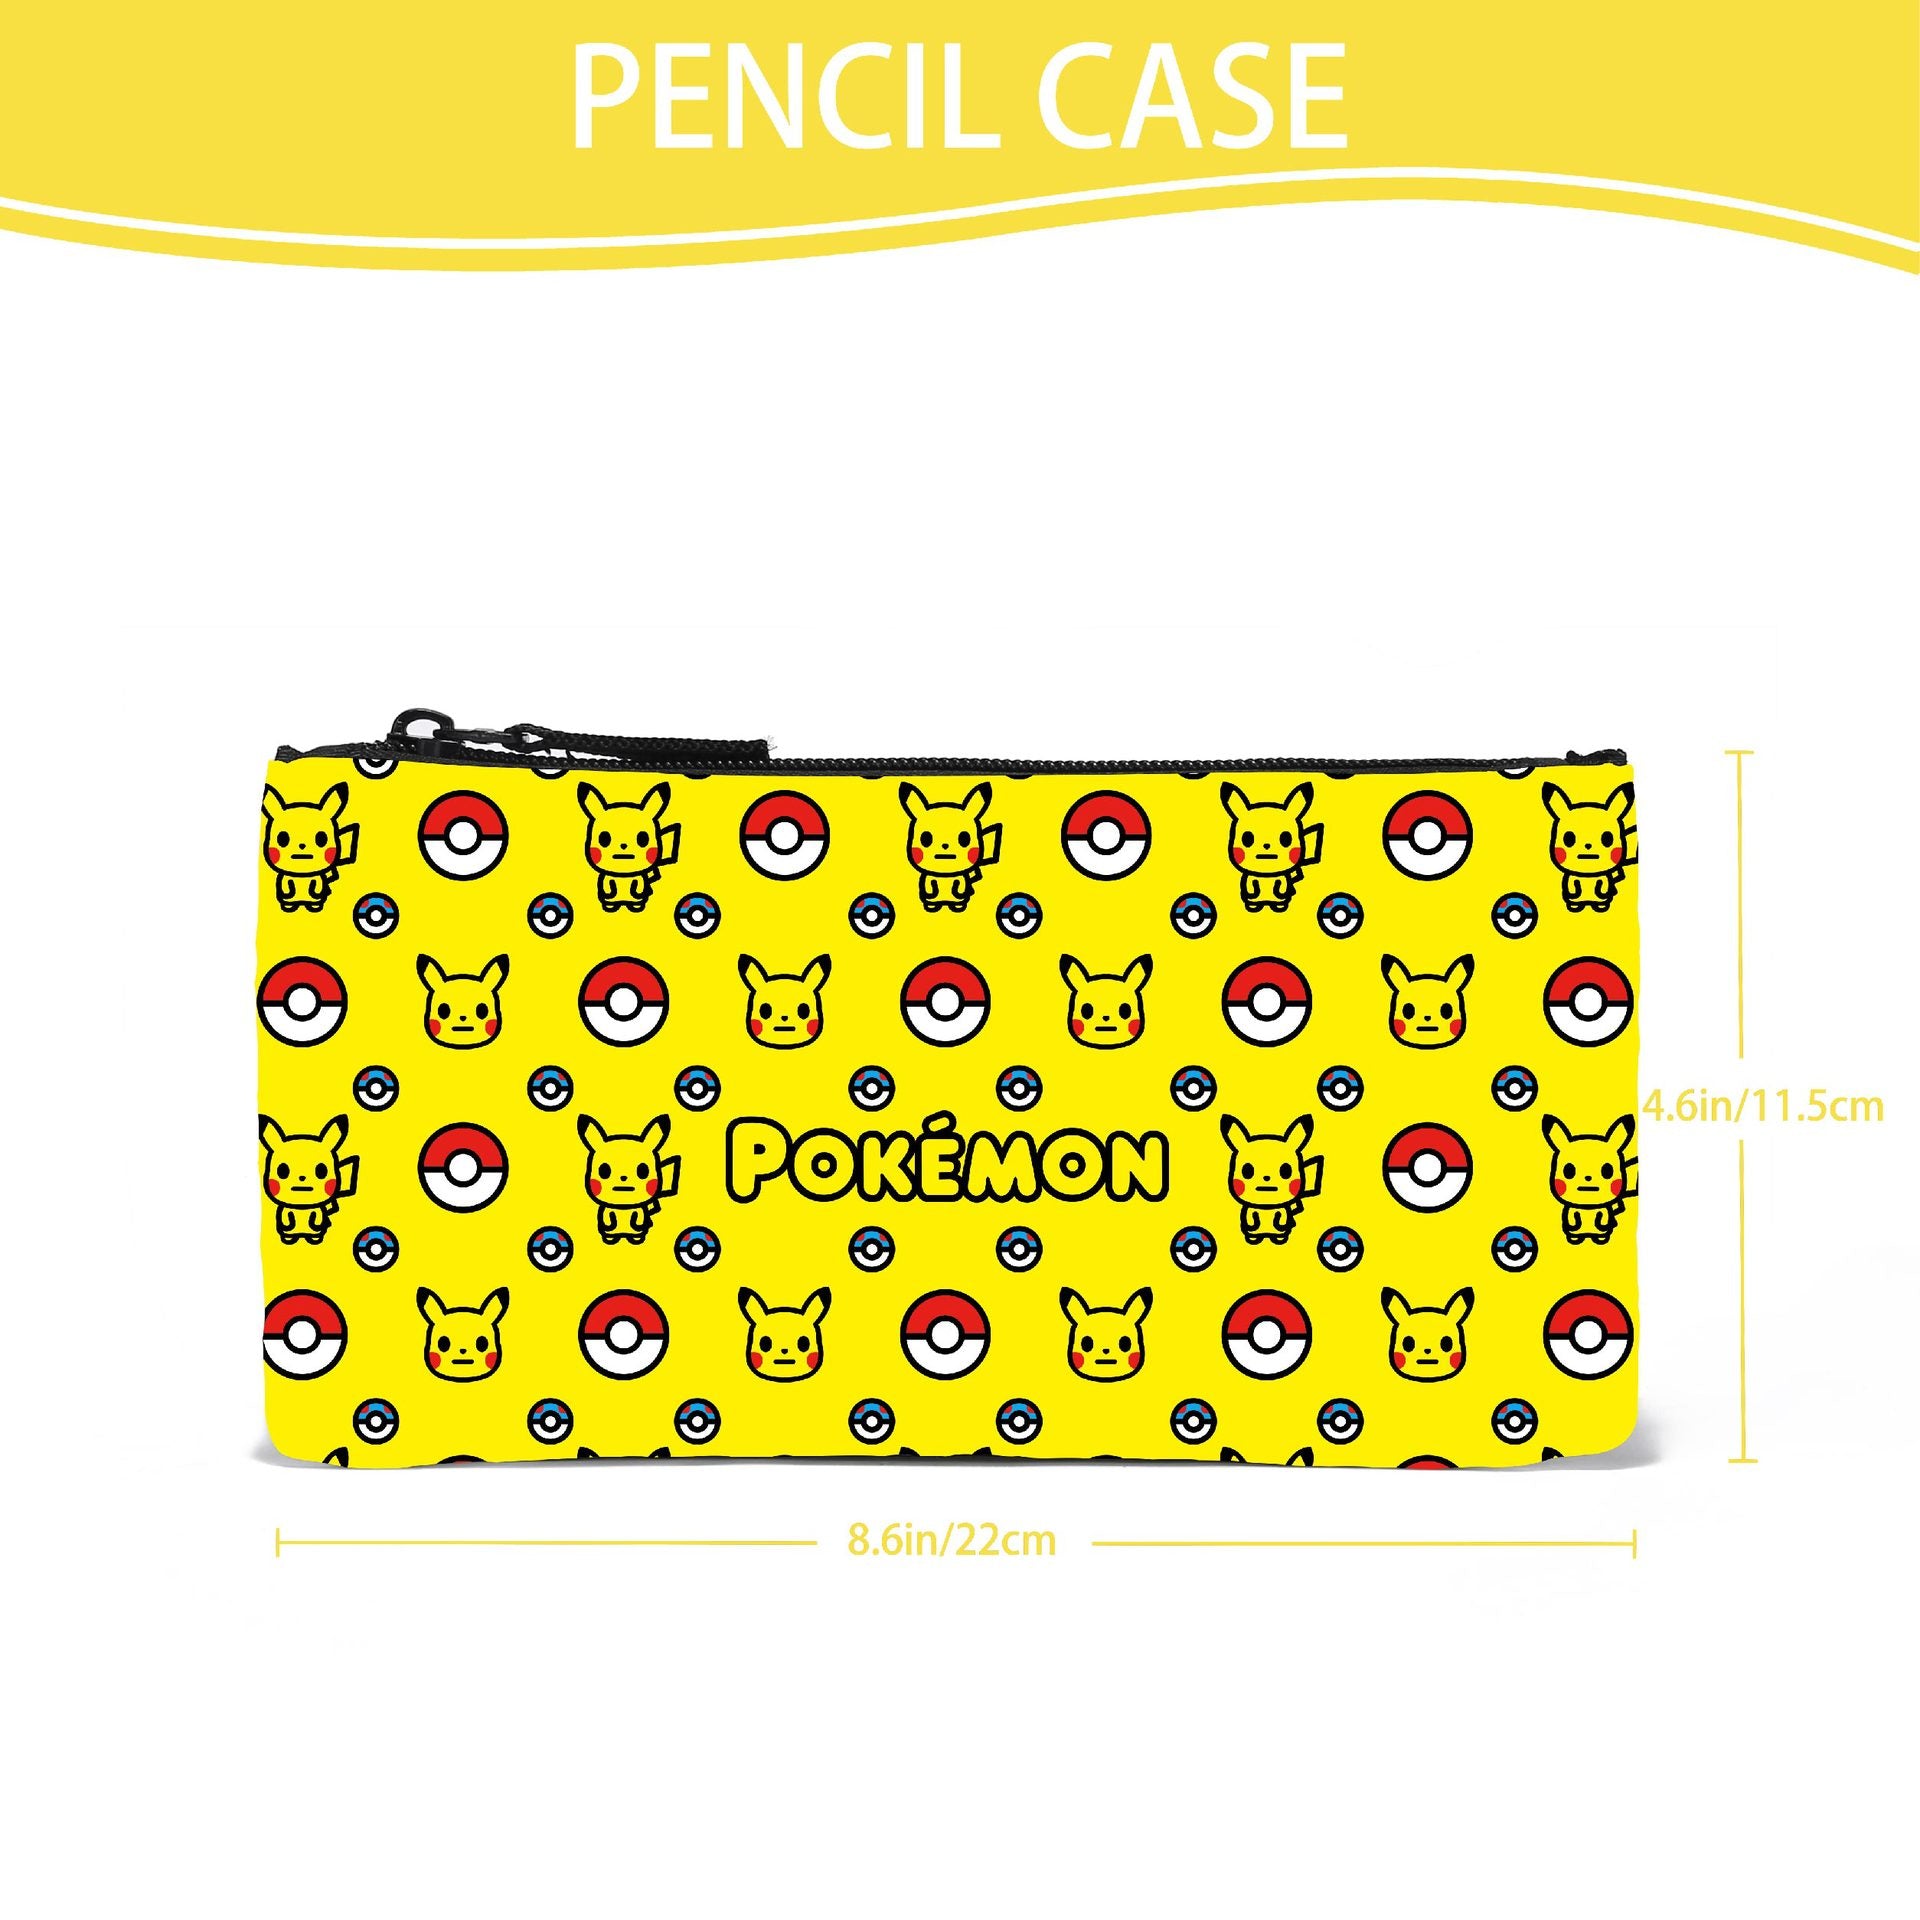 Pokémon’s backpack with free pencil case